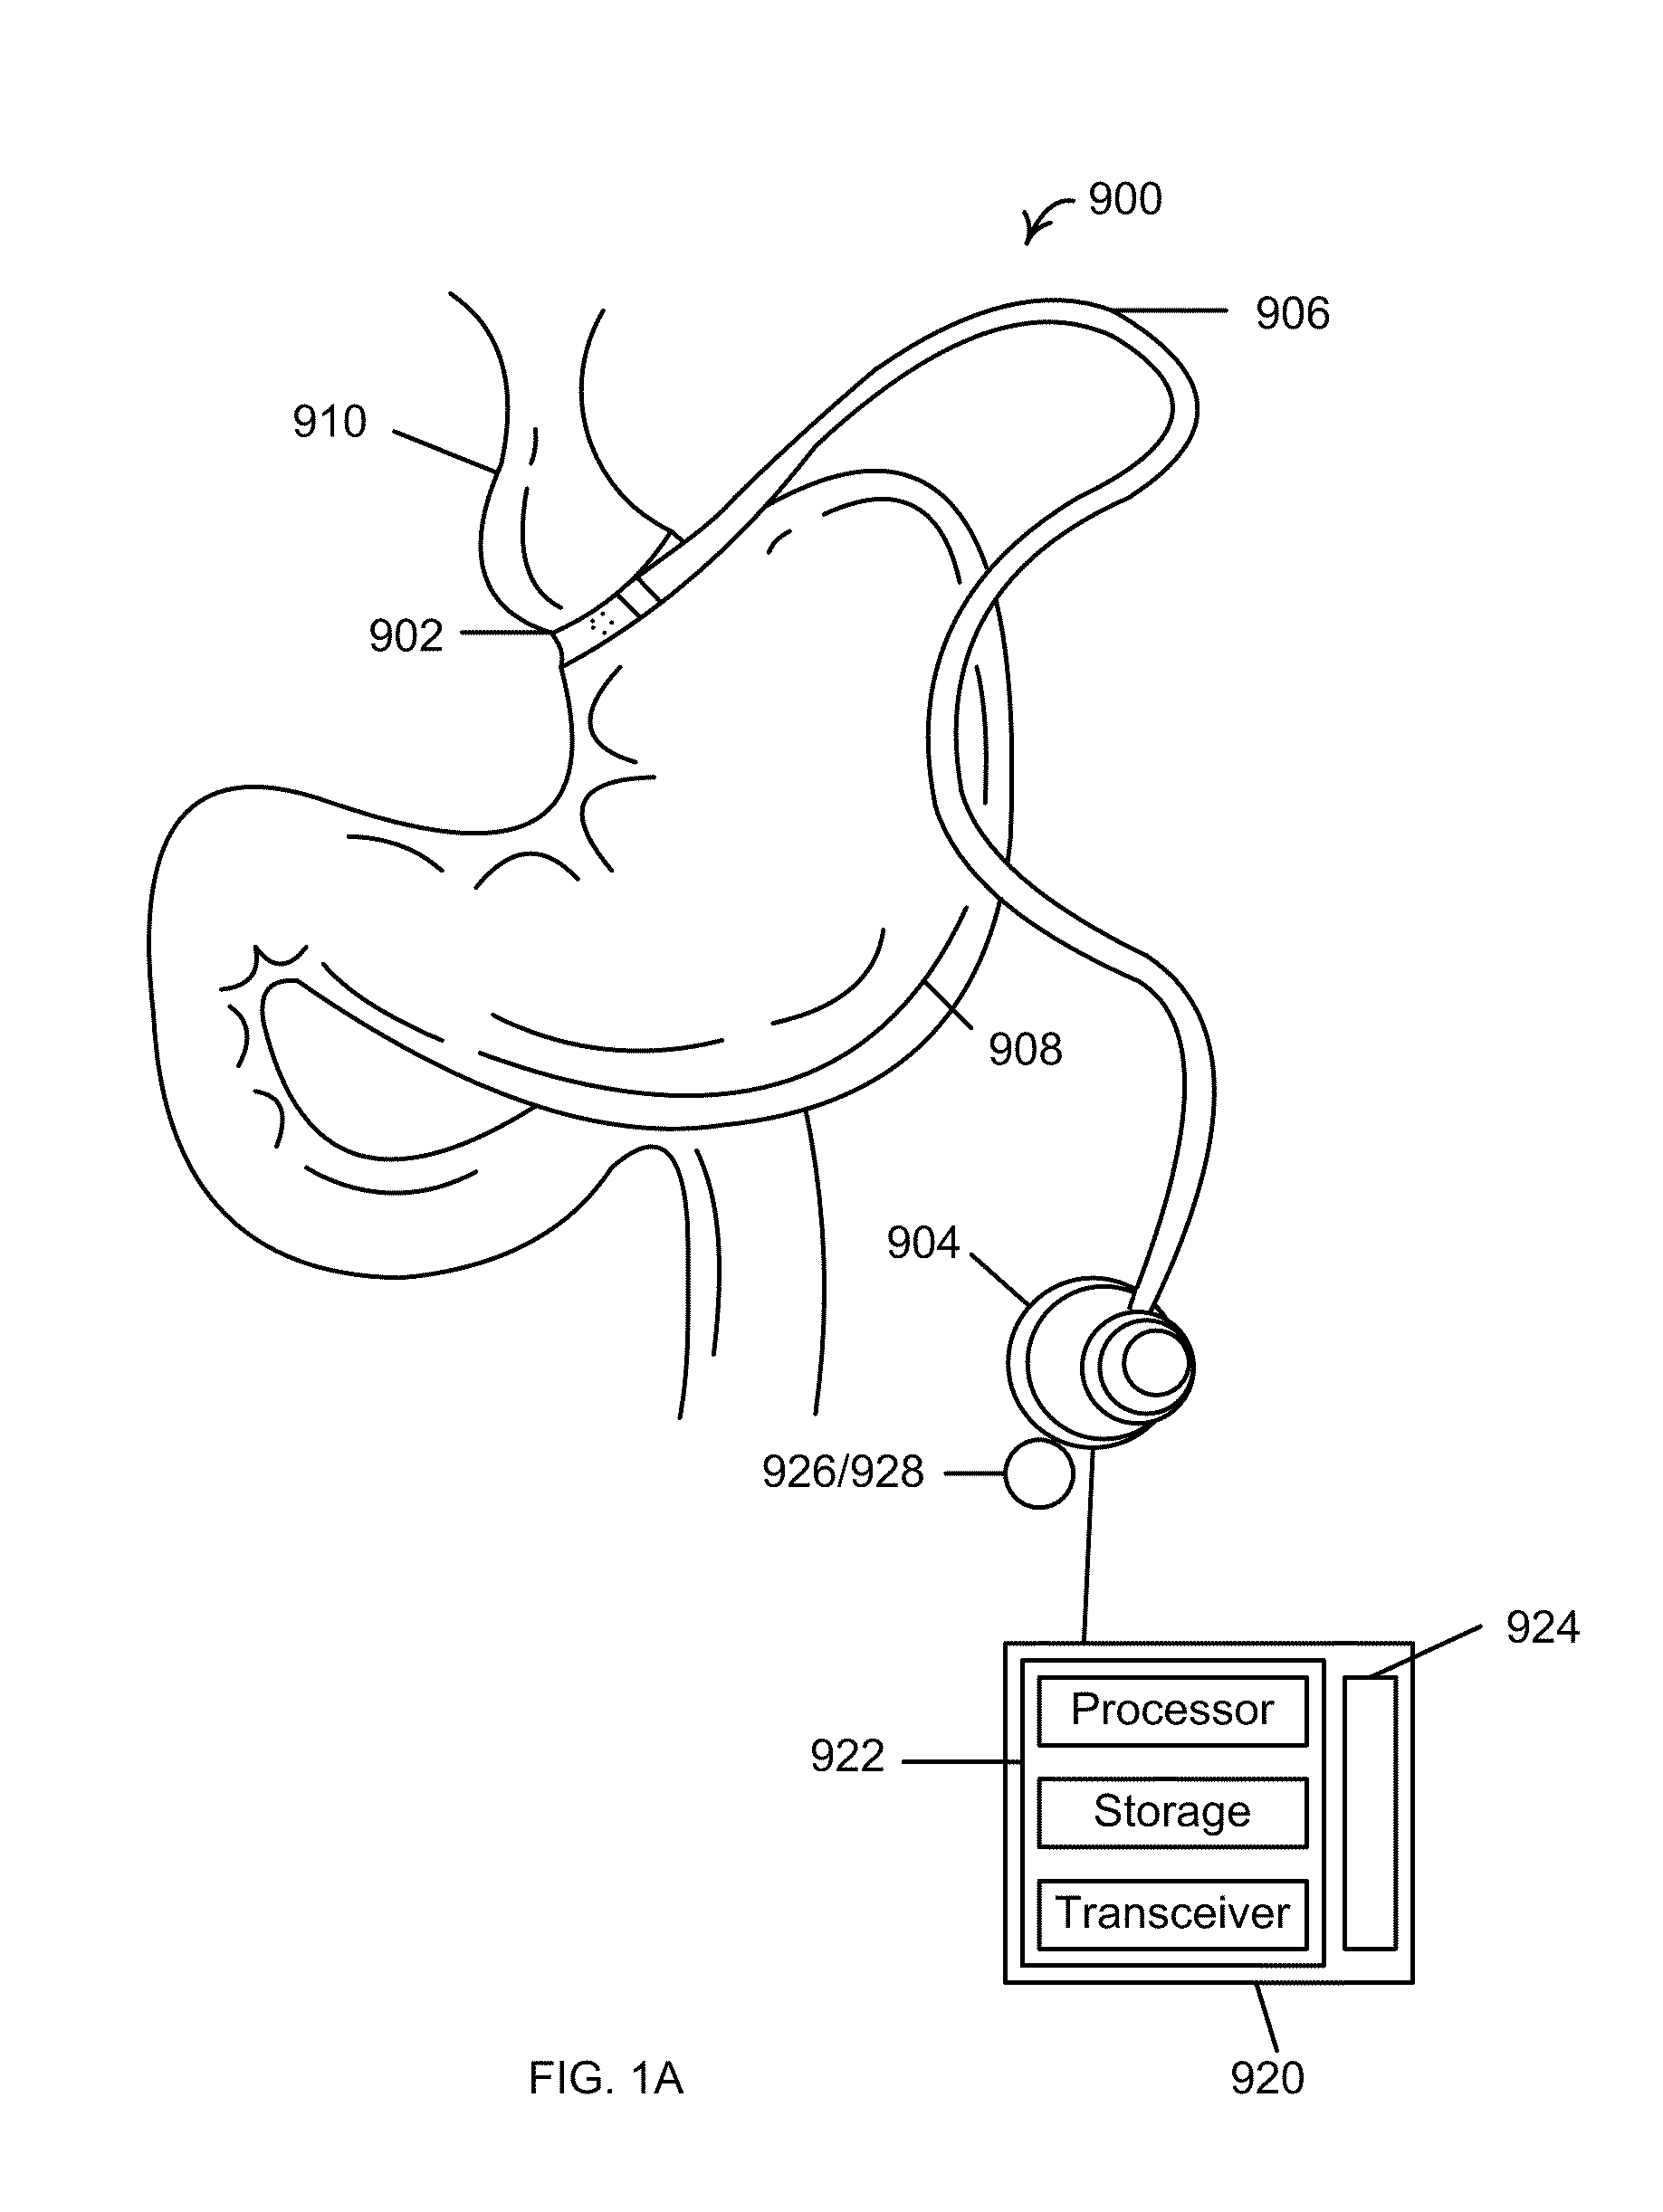 Feedback systems and methods to enhance obstructive and other obesity treatments